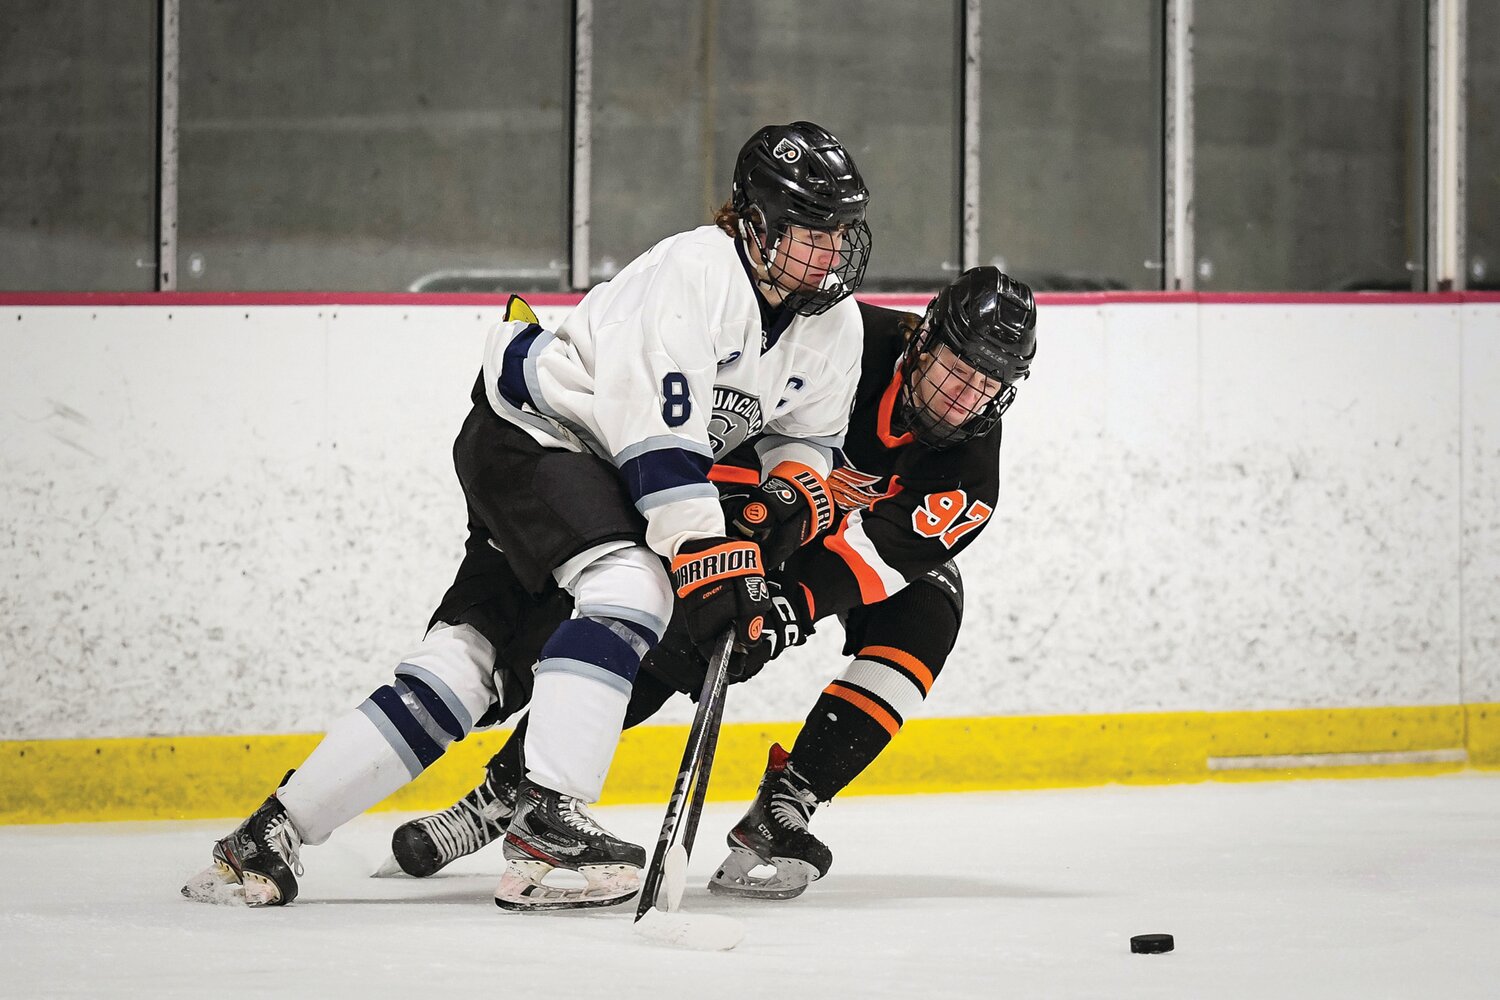 Council Rock North’s Nicholas Hahn and Pennsbury’s Connor Gray battle for the puck.